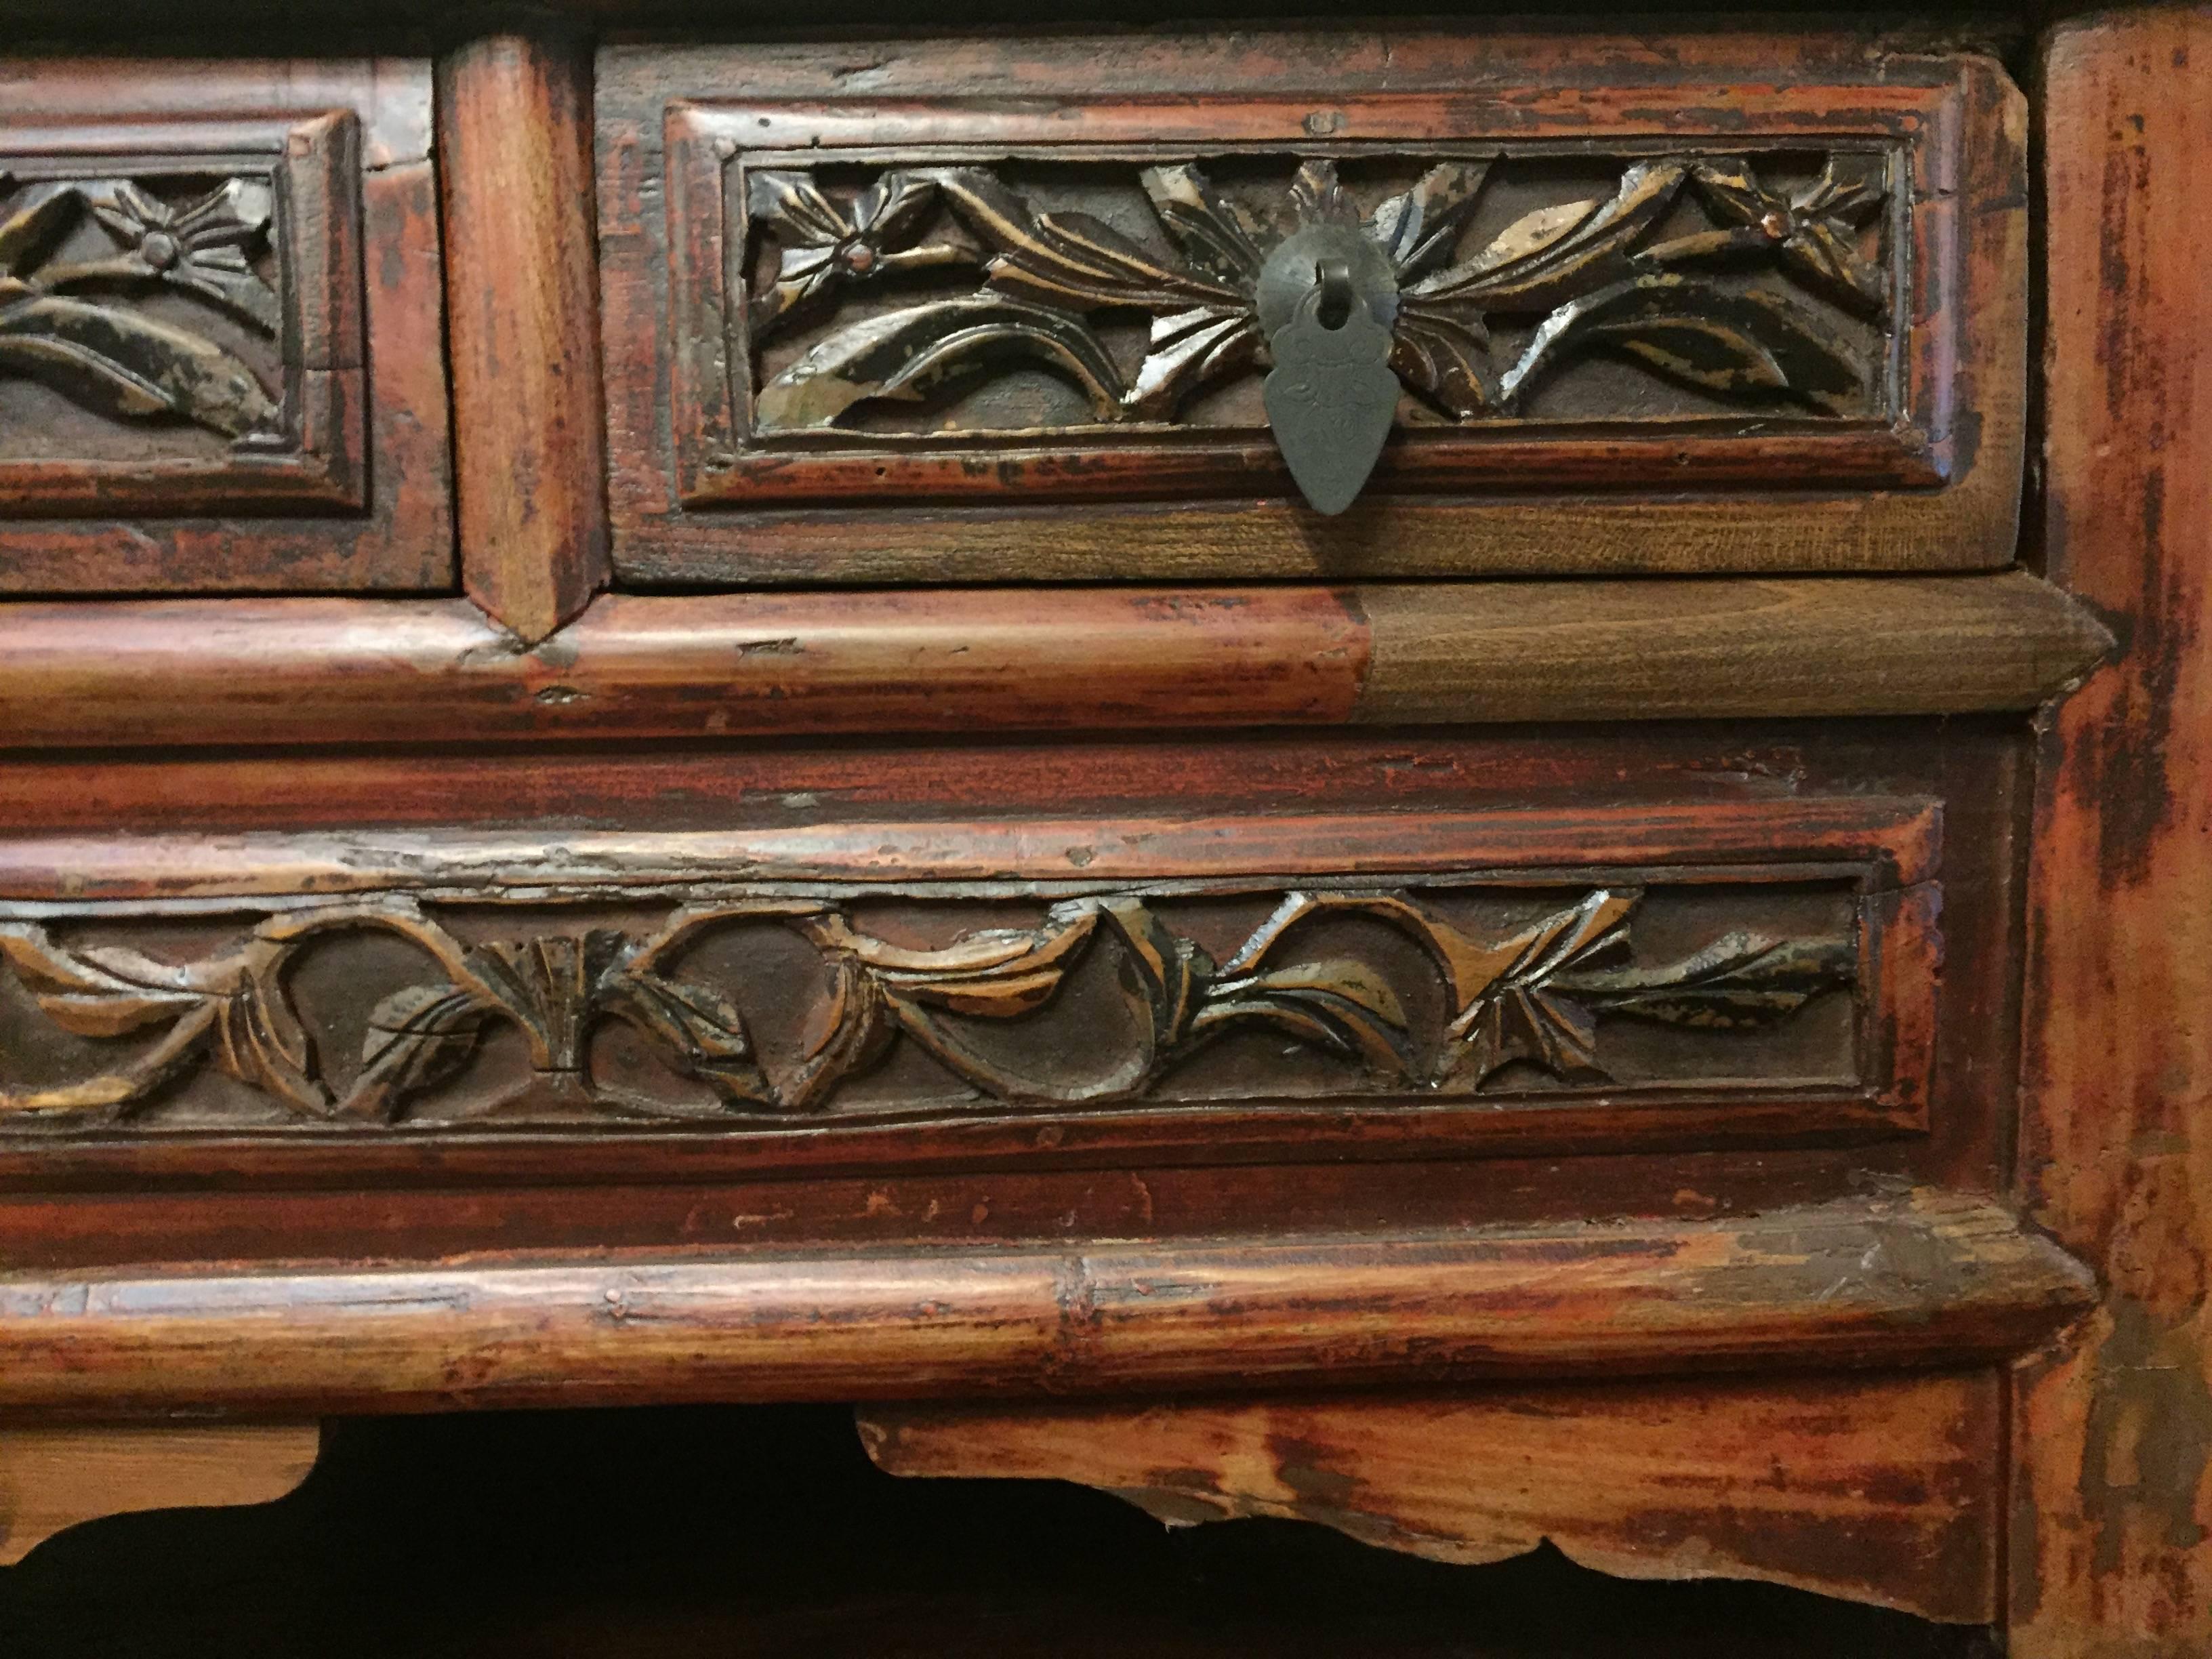 This wonderful low chest is the perfect table for your meditation room, excellent as a stand for a sculpture, books, towels and etc. It is also a great bench.

Beautiful solid wood makes the chest. Rustic, artistic carvings enhance its charm. Two